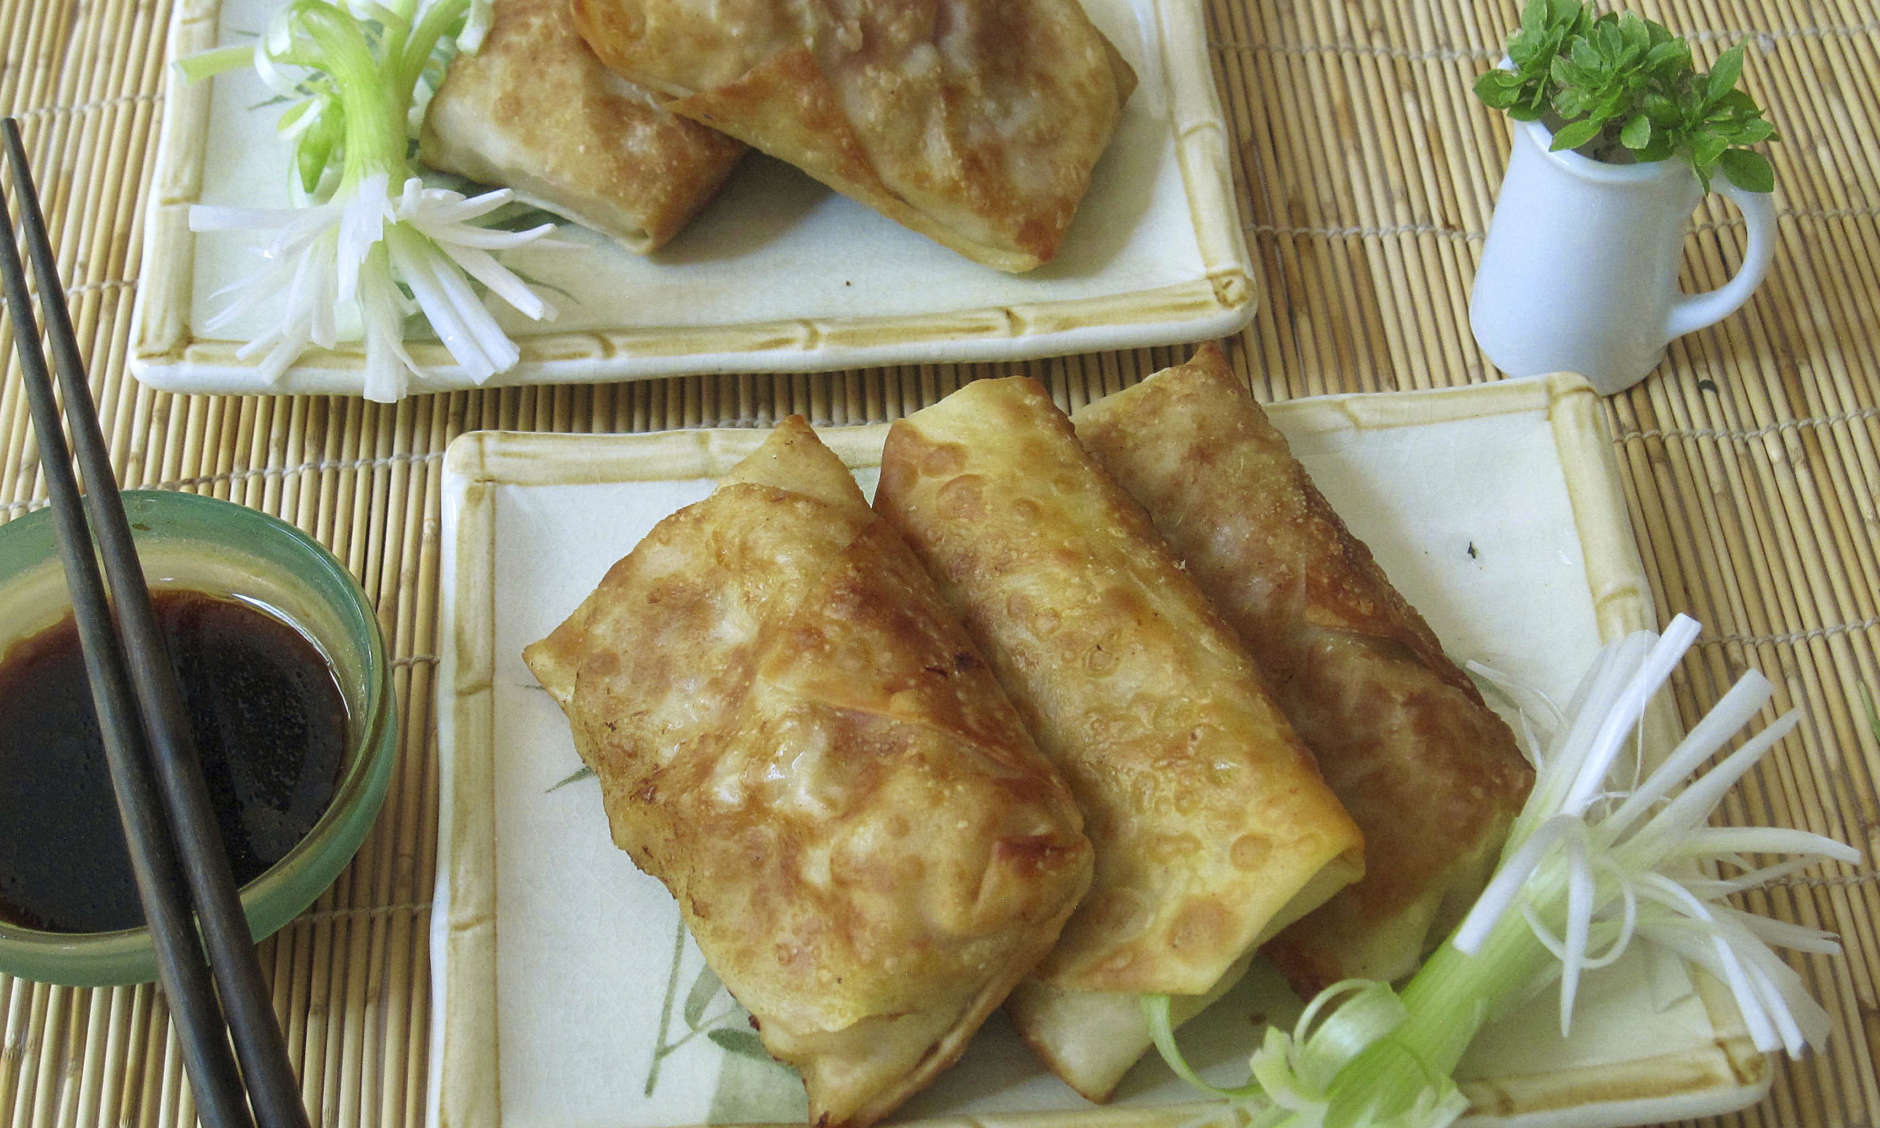 This August 2017 photo shows "not fried egg rolls" in New York. This dish is from a recipe by Sara Moulton. (Sara Moulton via AP)